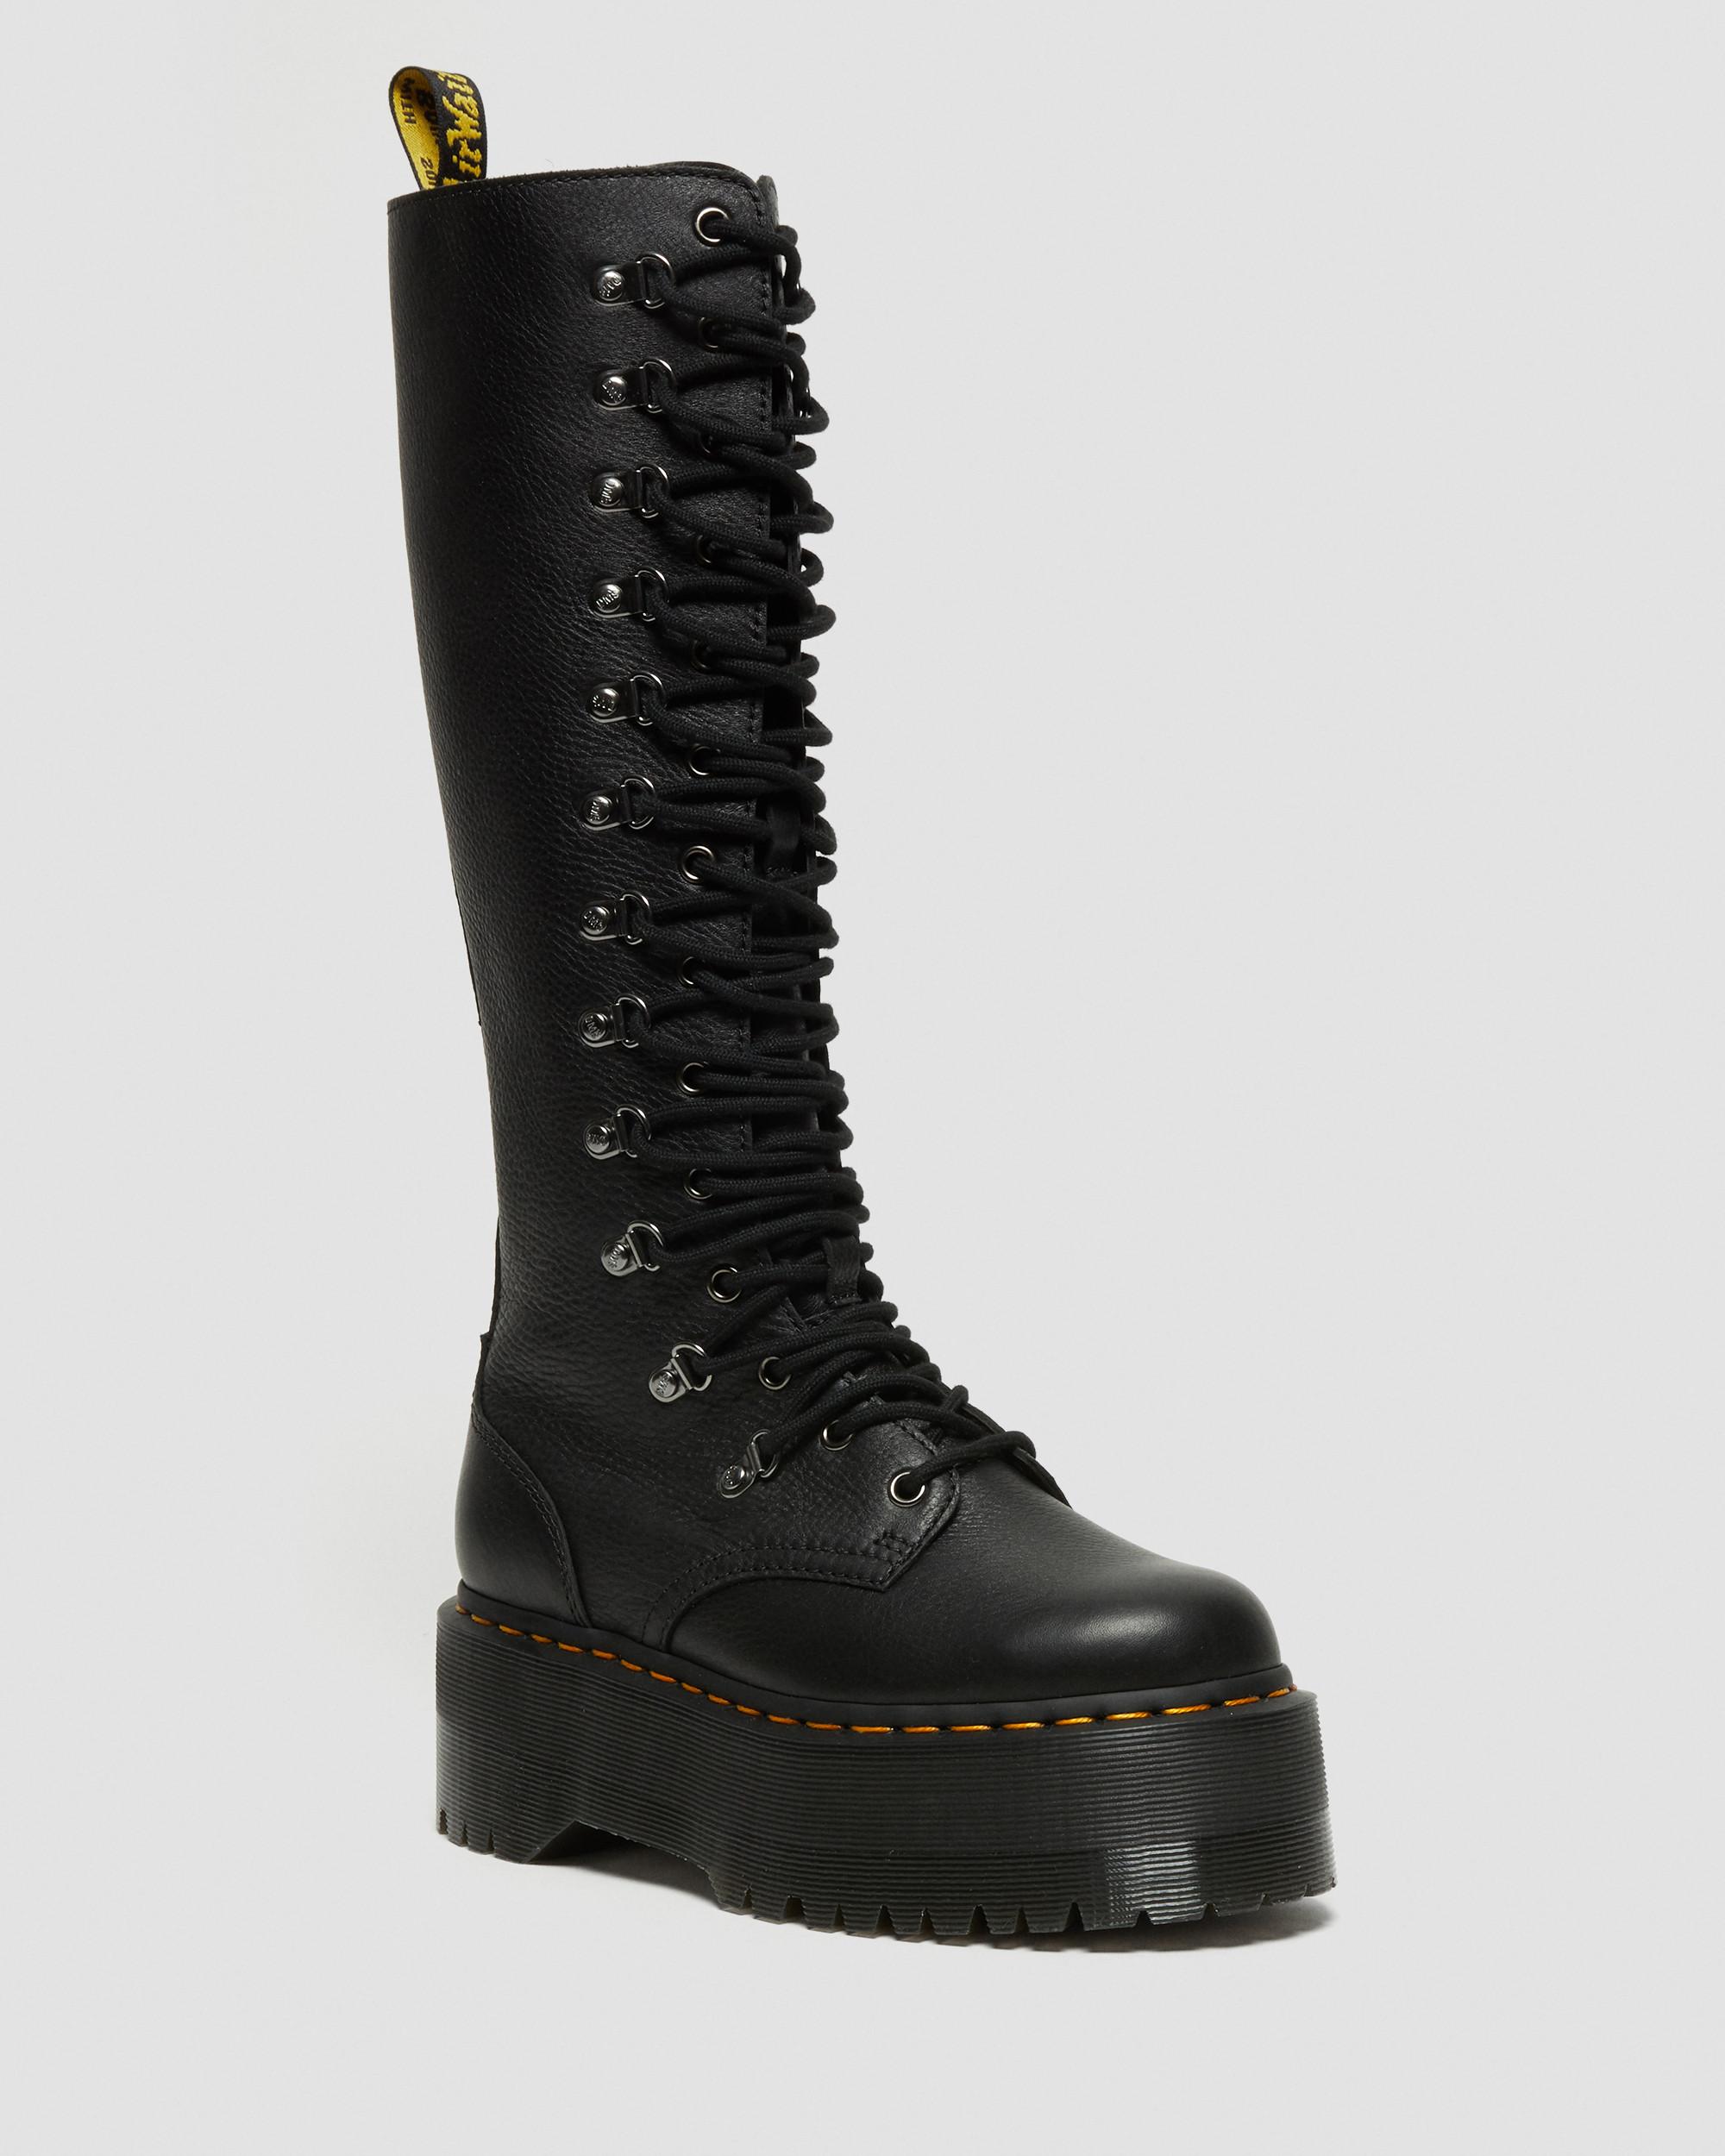 1B60 Max Hardware Leather Knee High Boots, Black | Dr. Martens